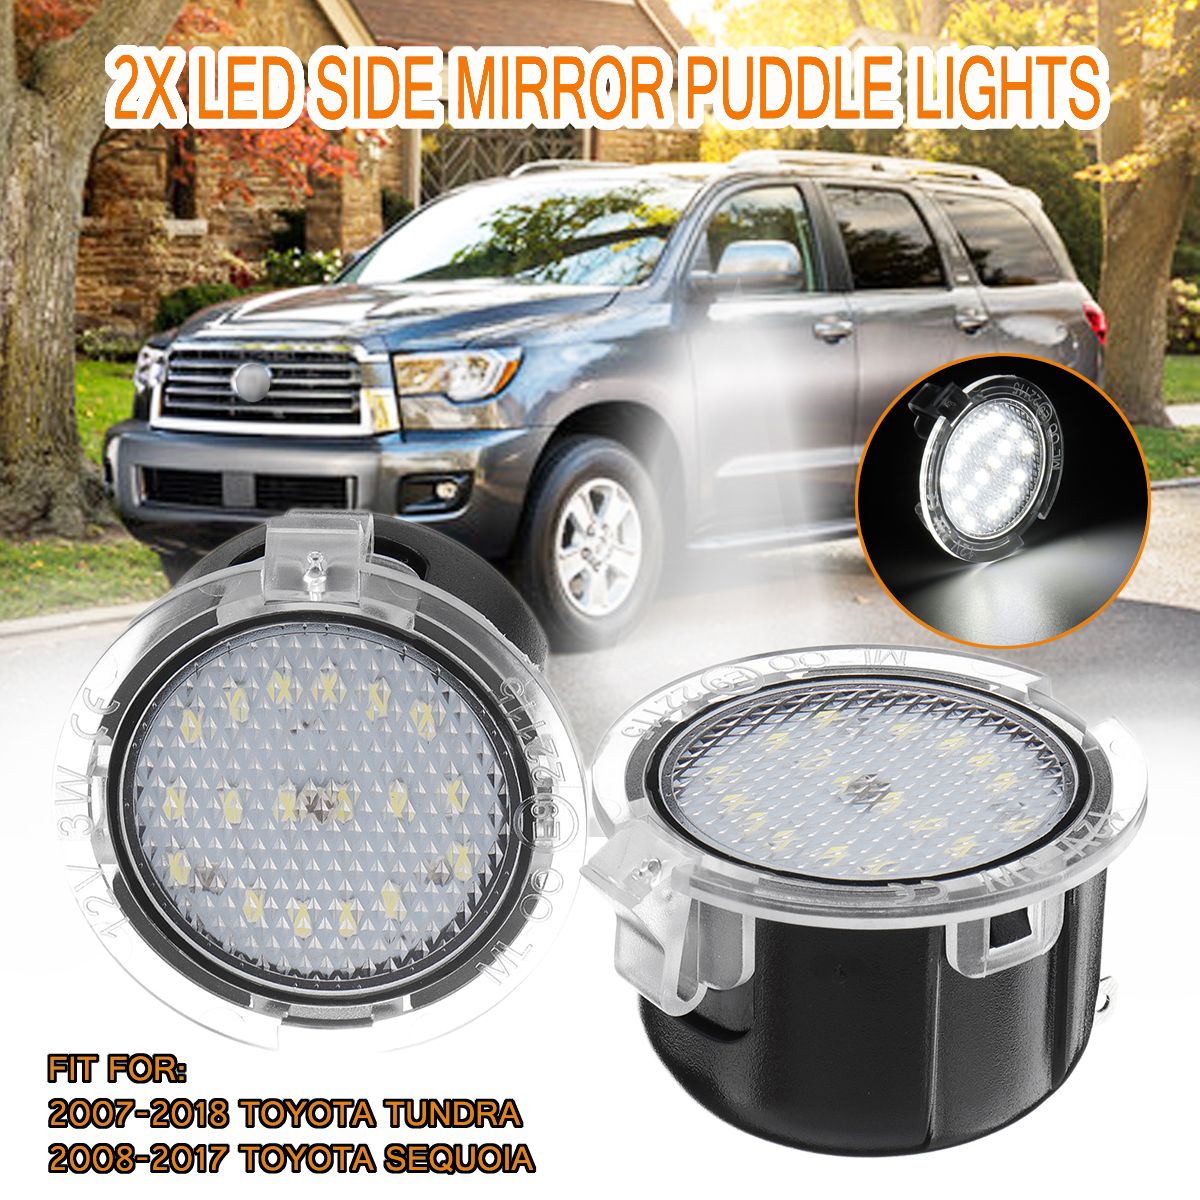 2Pcs-18-LED-Side-Mirror-Rearview-Puddle-Light-6000K-DC-12V-3W-Waterproof-for-Toyota-TundraSequoia-1592725